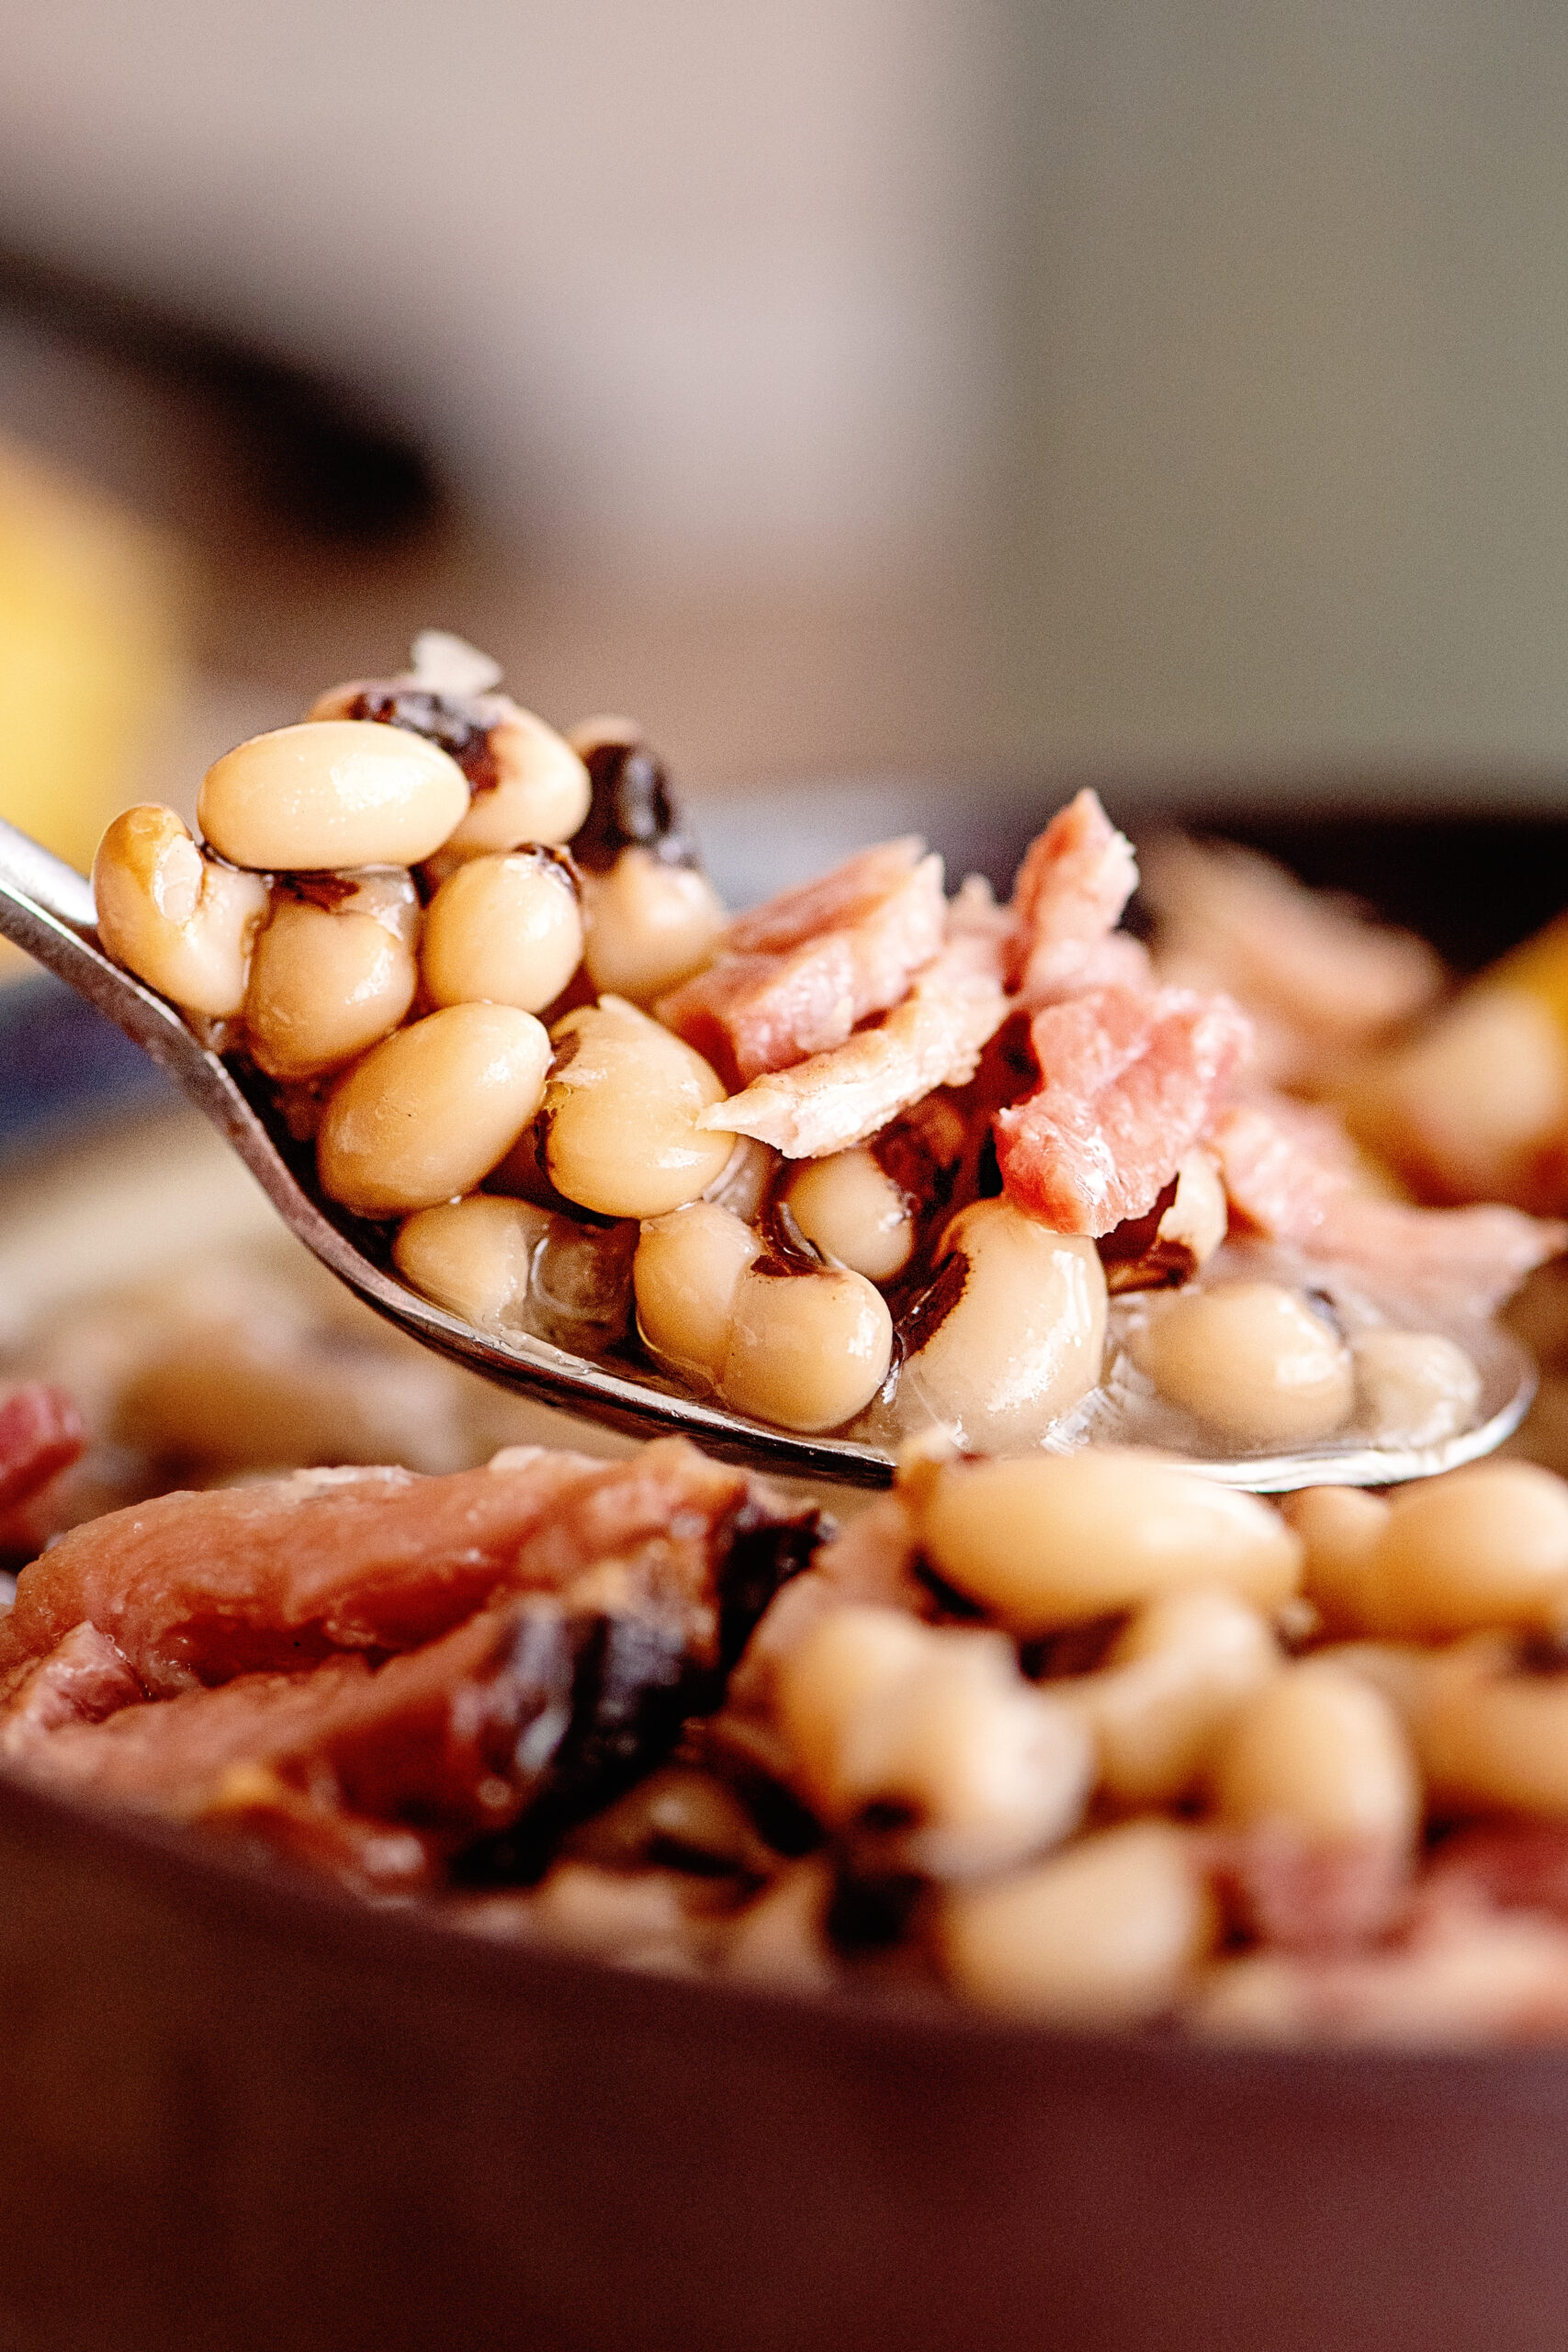 Black Eyed Peas and Ham For New Year’s Day